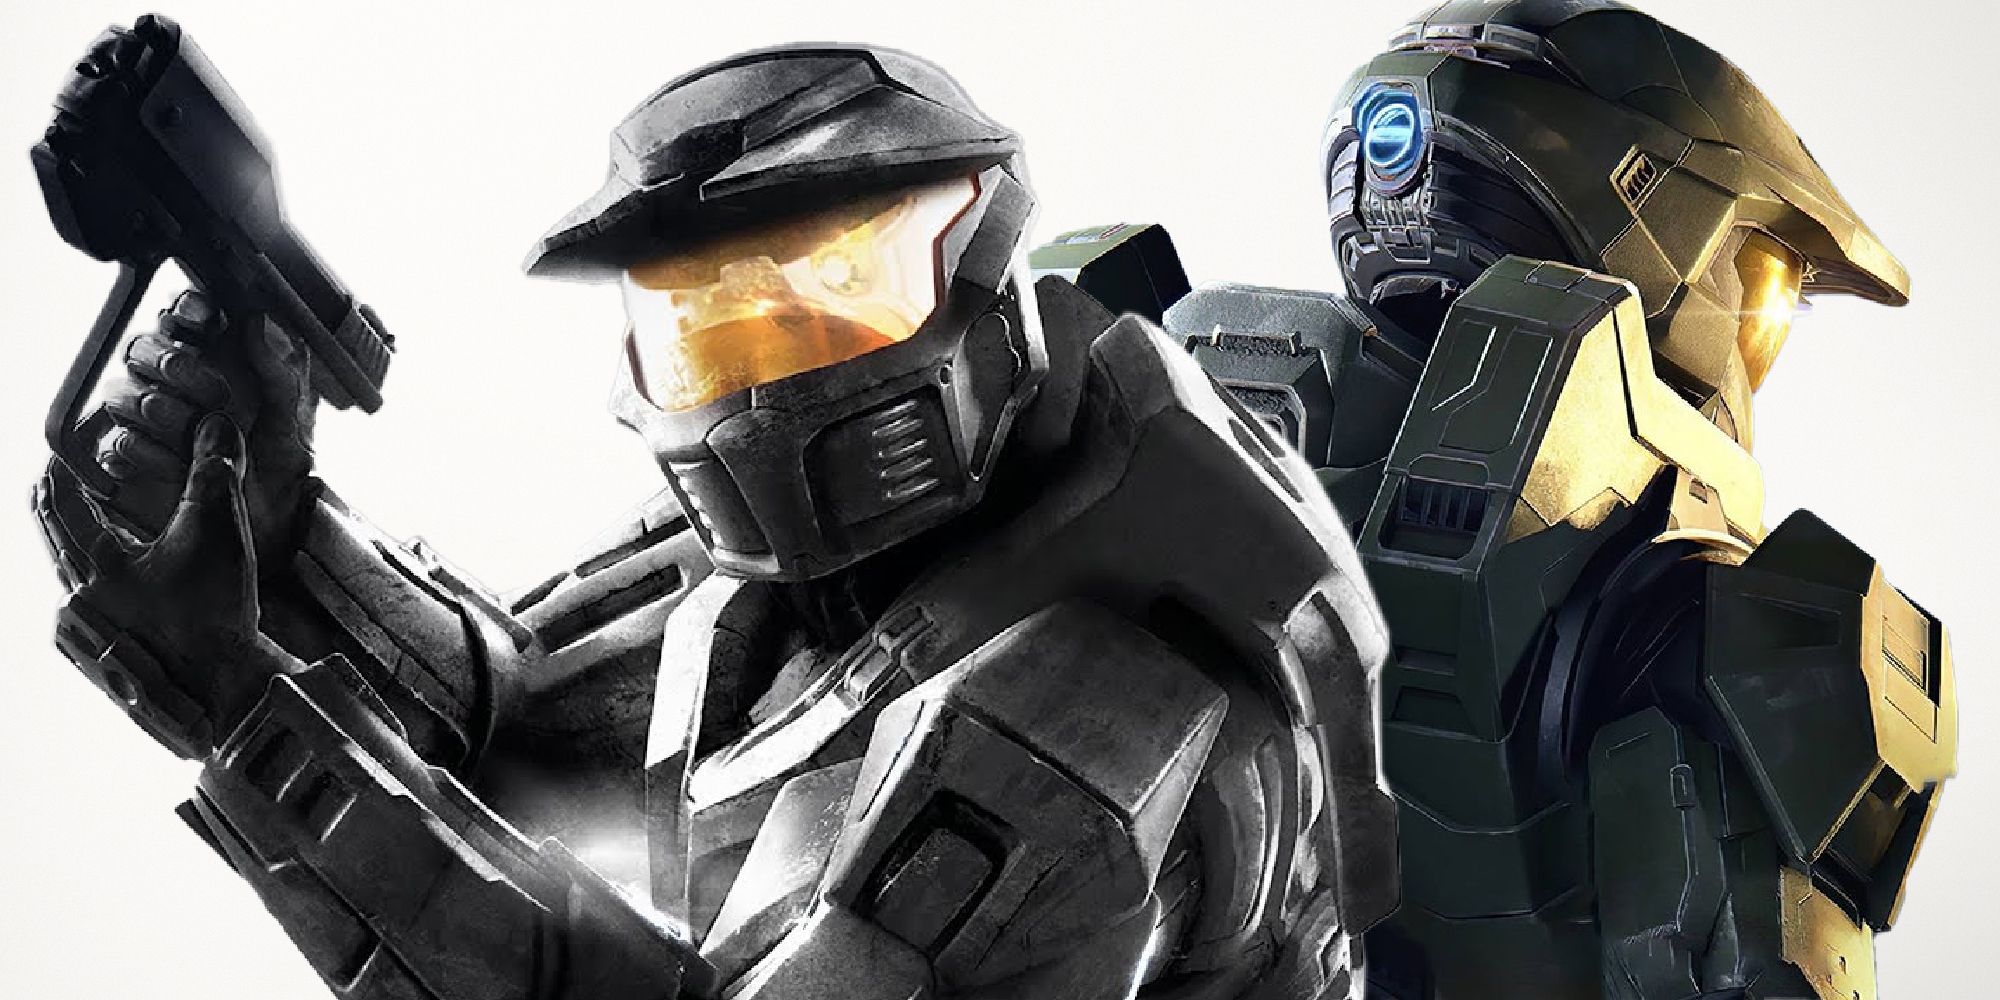 Halo past and present